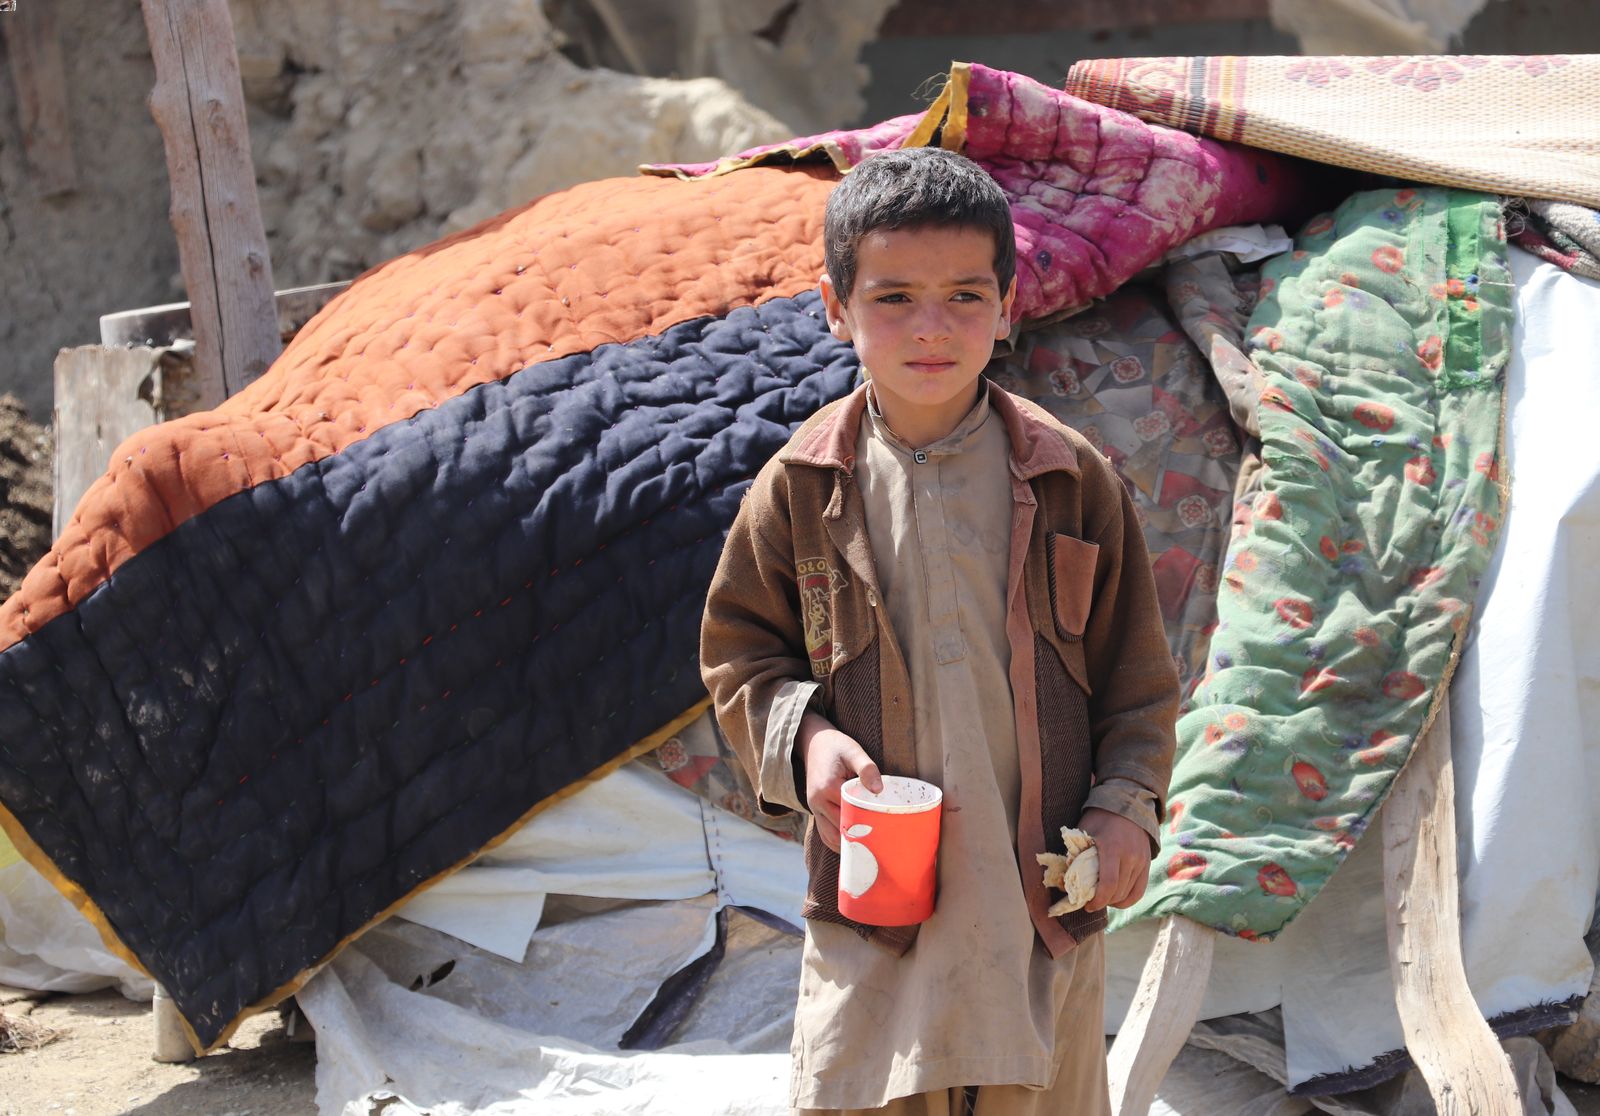 Halim, 8, from Gayan Village, Paktika Province standing in the street in front of a makeshift shelter following the Afghanistan earthquake.